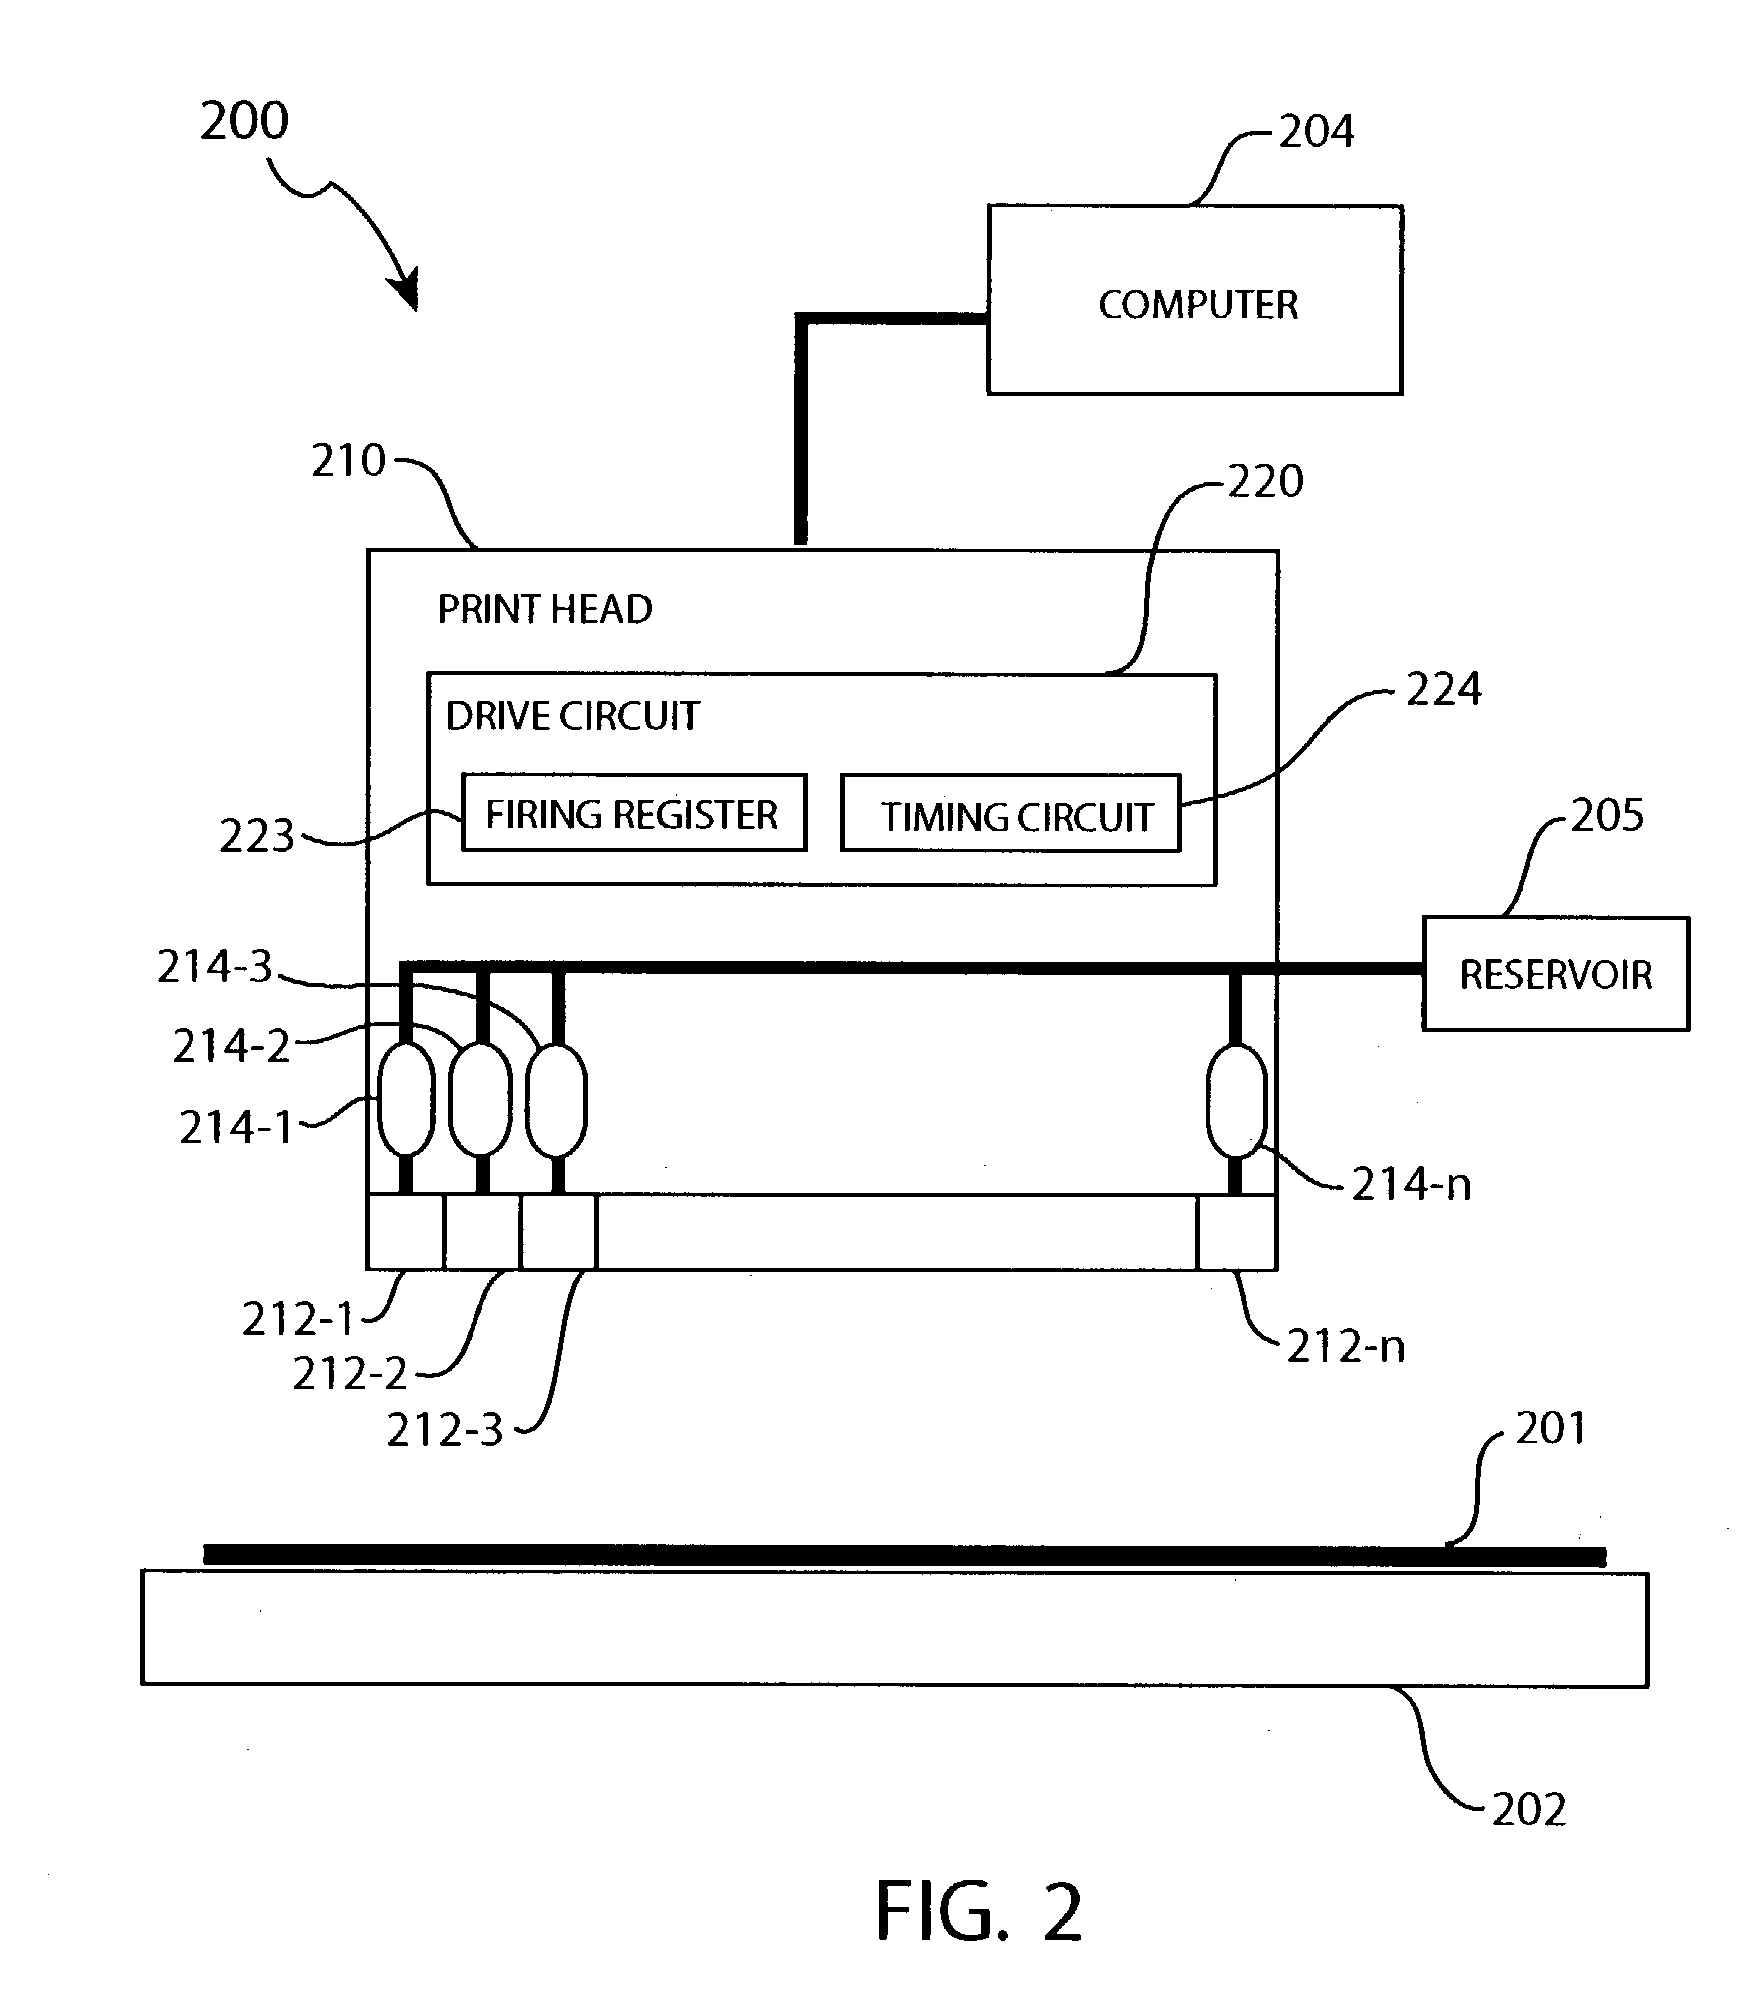 Deposition of integrated circuit fabrication materials using a print head